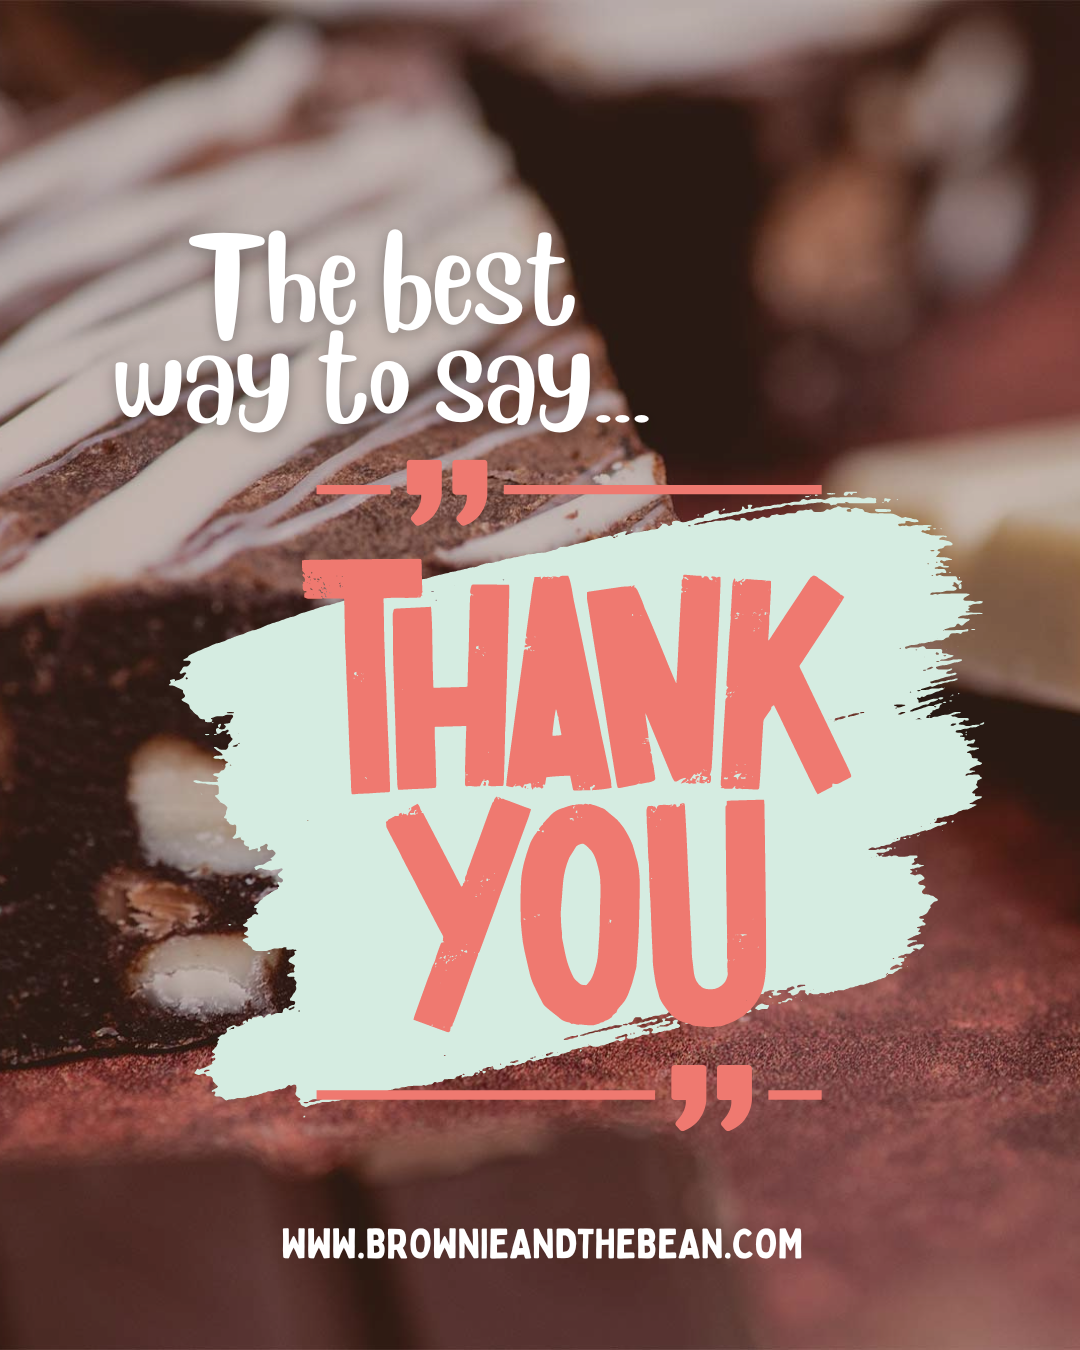 Triple chocolate brownies are in the background on a brown marbled surface. There are words in white saying "the best way to say..." and in pink on a pale mint green background it says "thank you" below this the website url is in white.